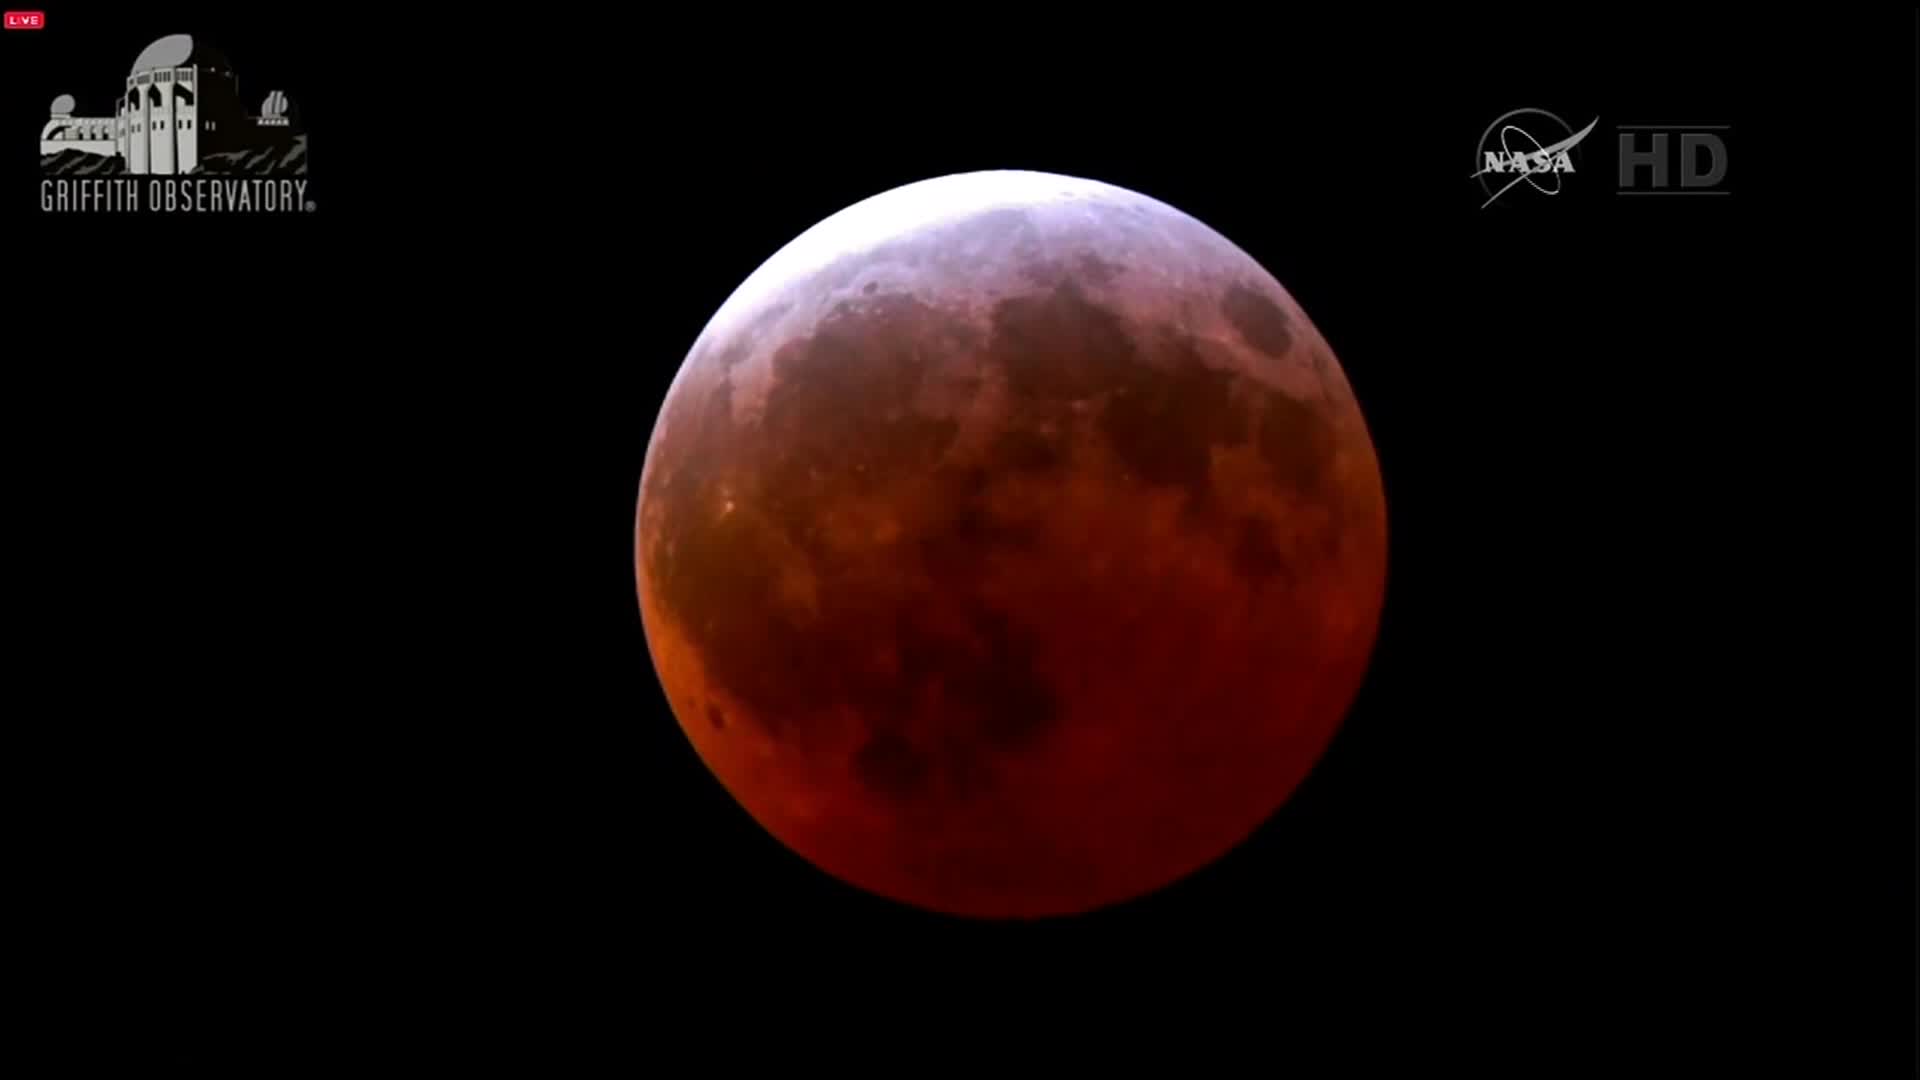 Super blue blood moon to appear on Jan 31